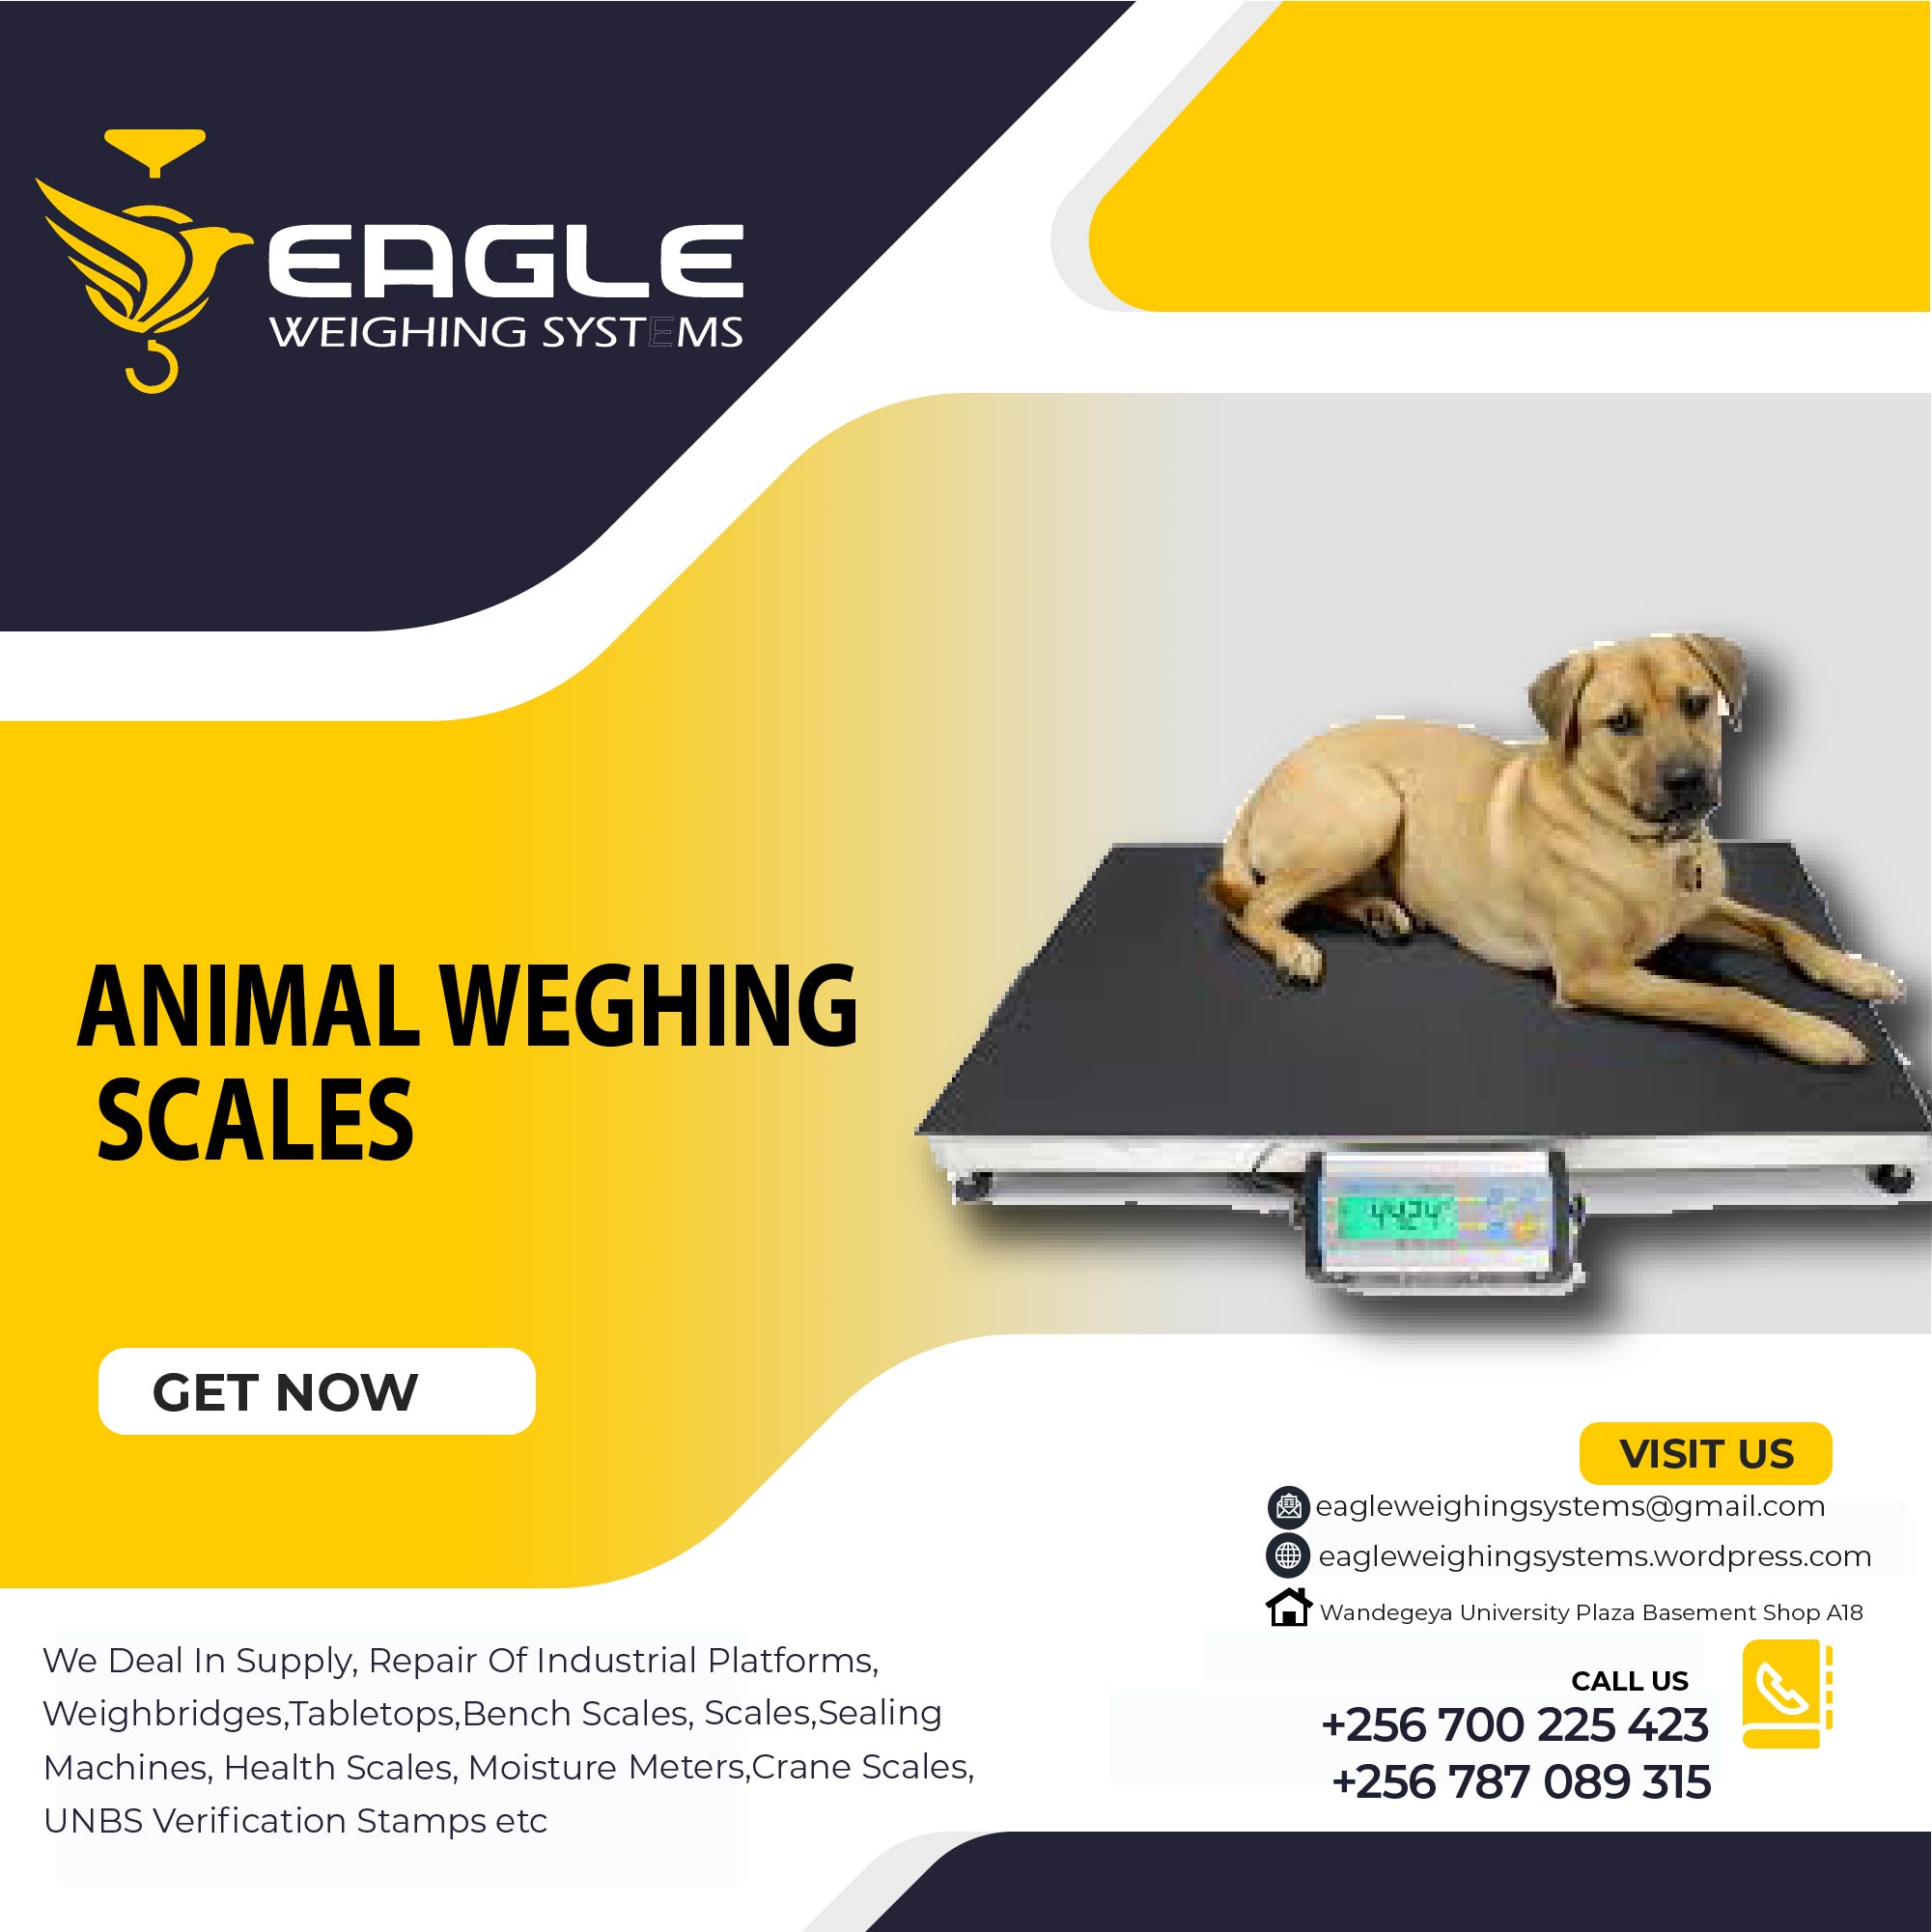 Stainless steel top platform animal weighing scale with rail in Kampala Uganda, Kampala Central Division, Central, Uganda